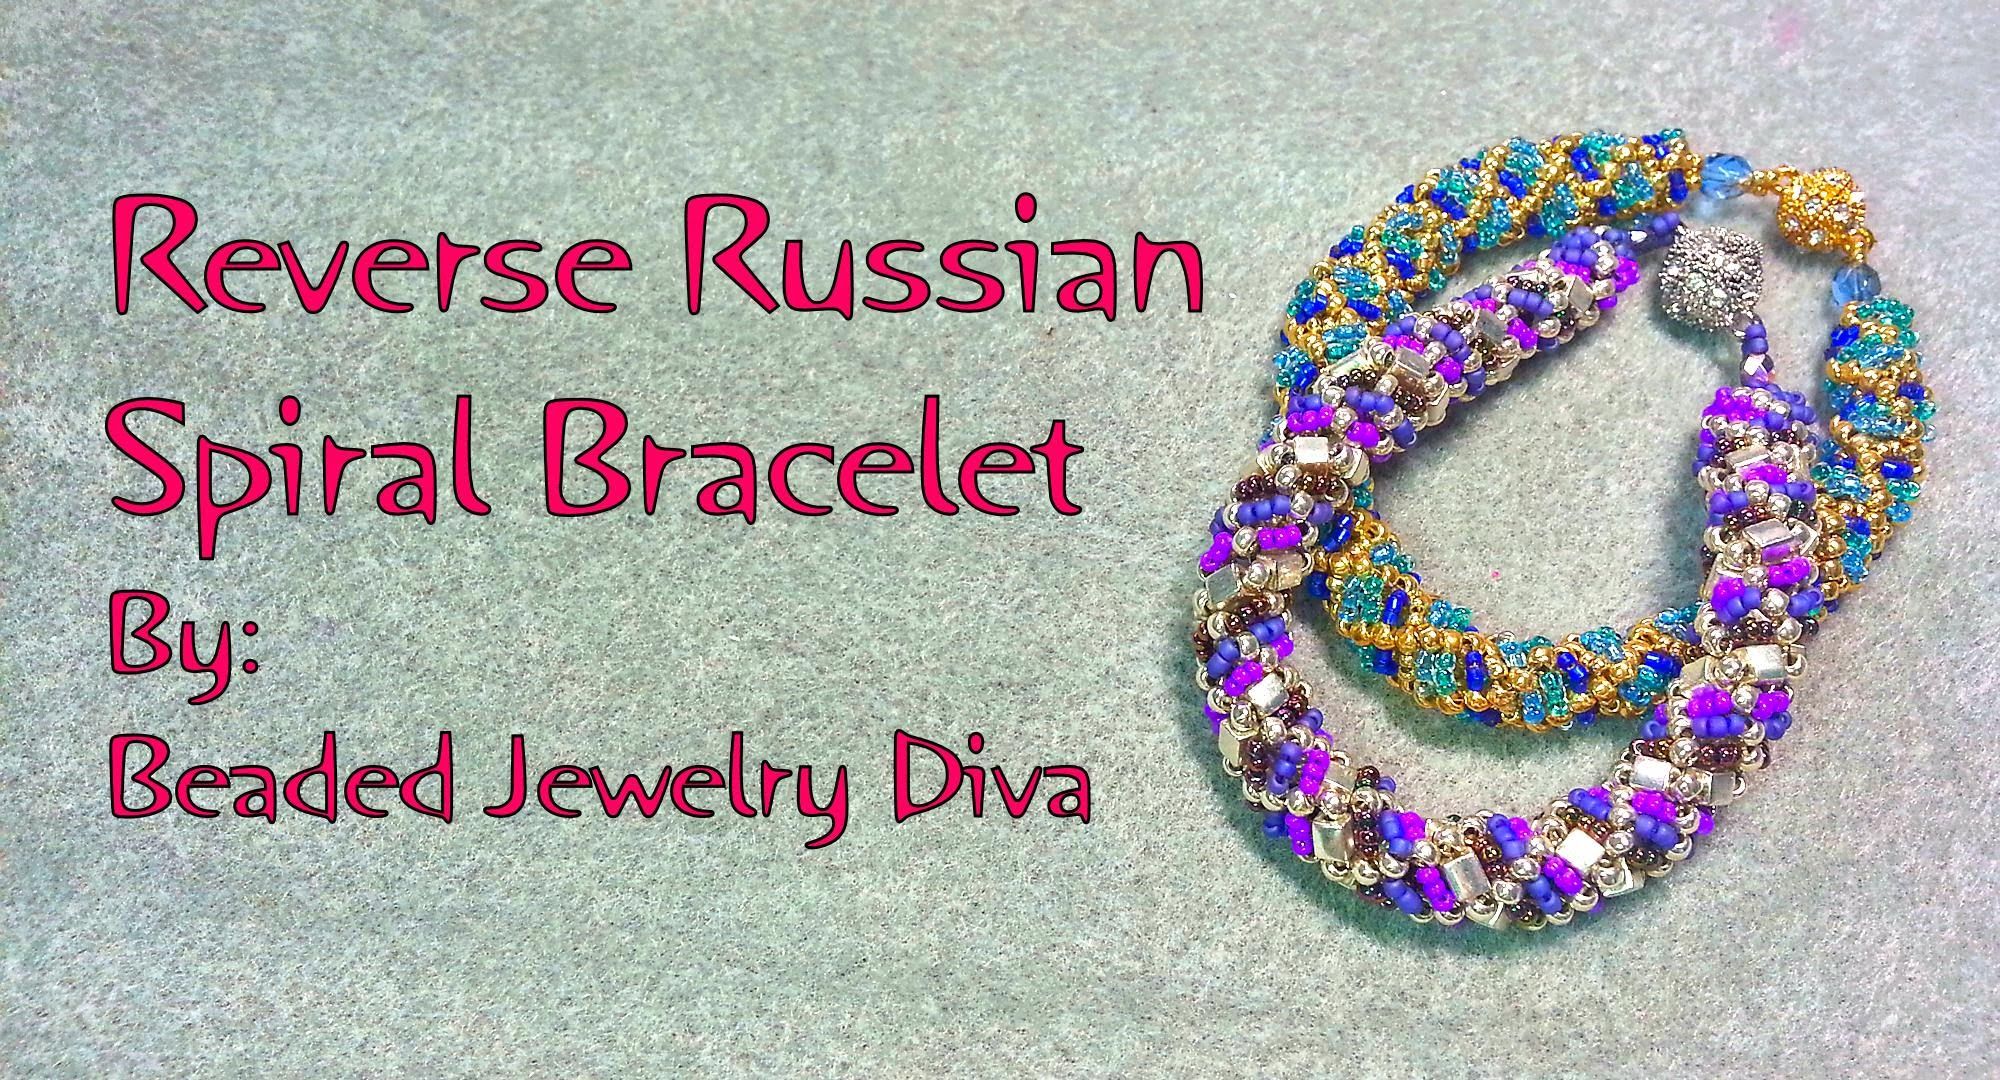 beading instructions russian spiral